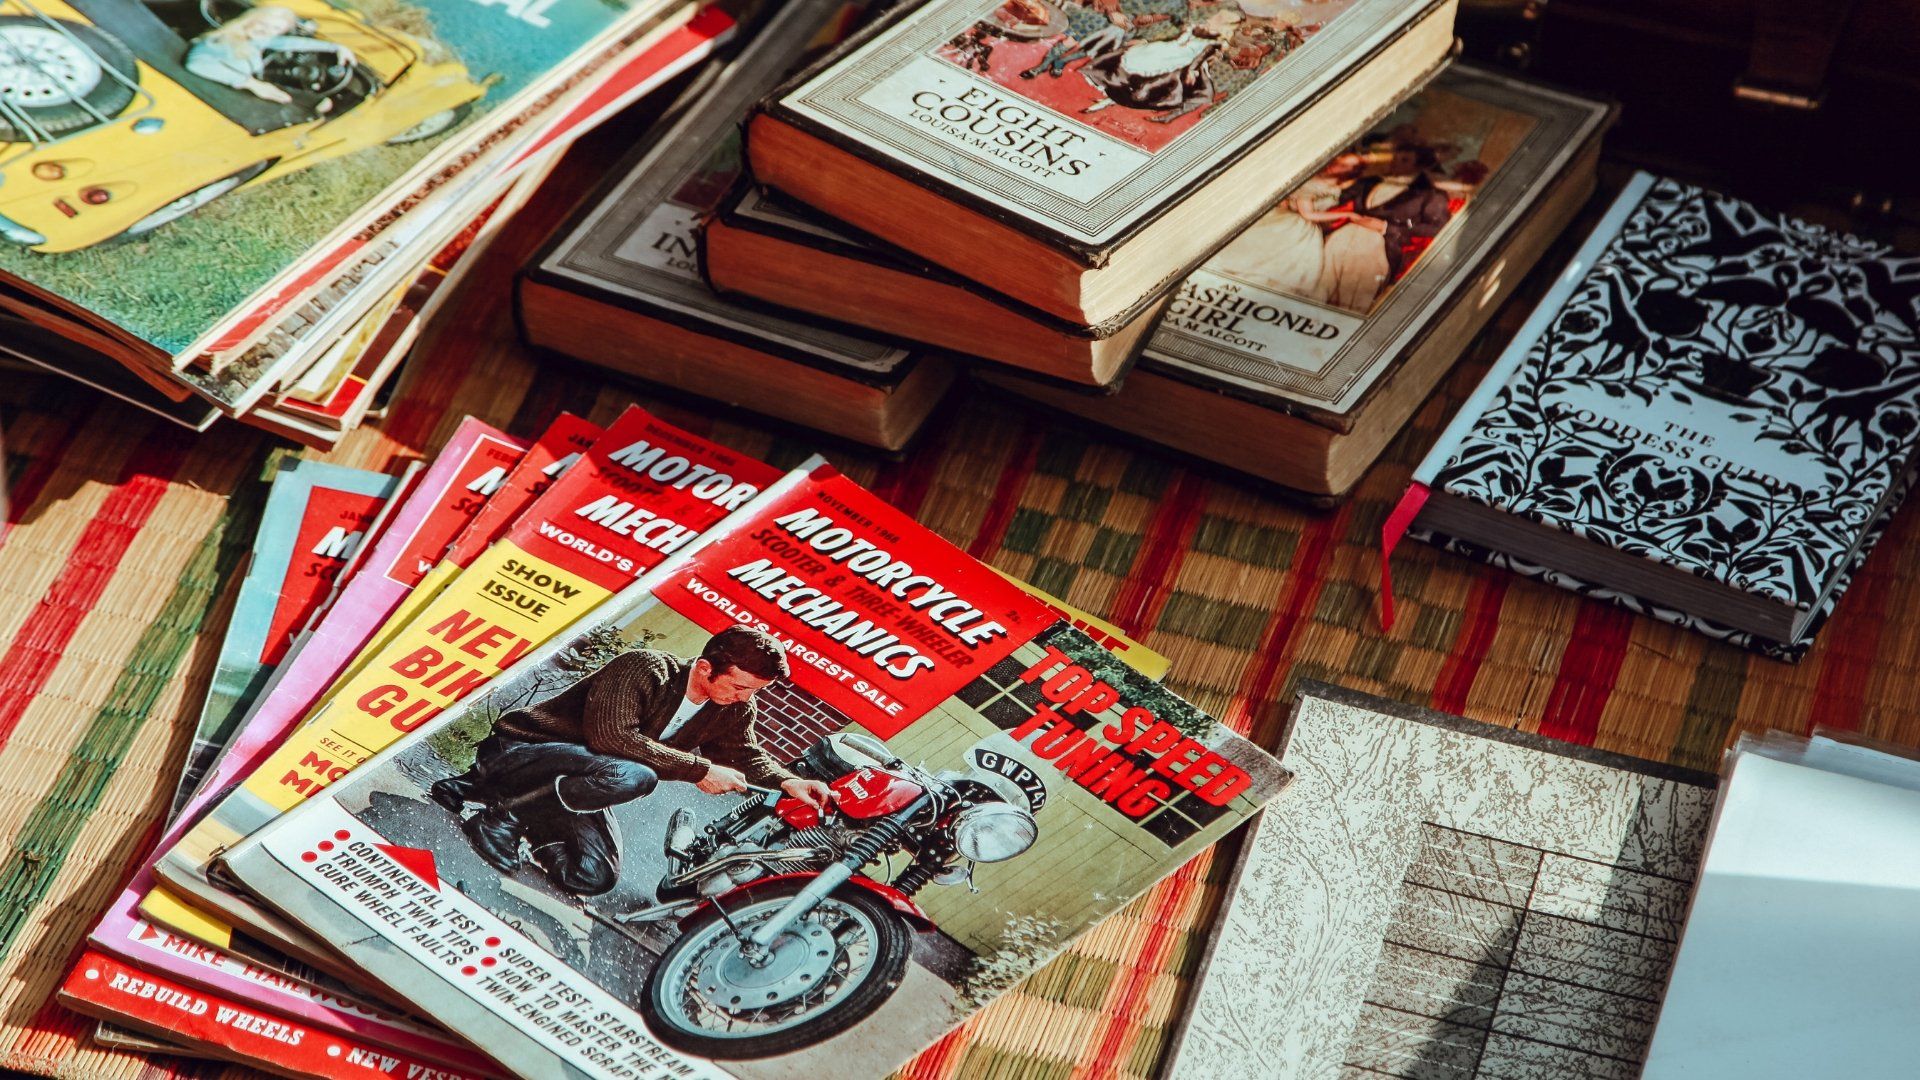 A pile of books including a magazine on motor cycle mechanics - 60s